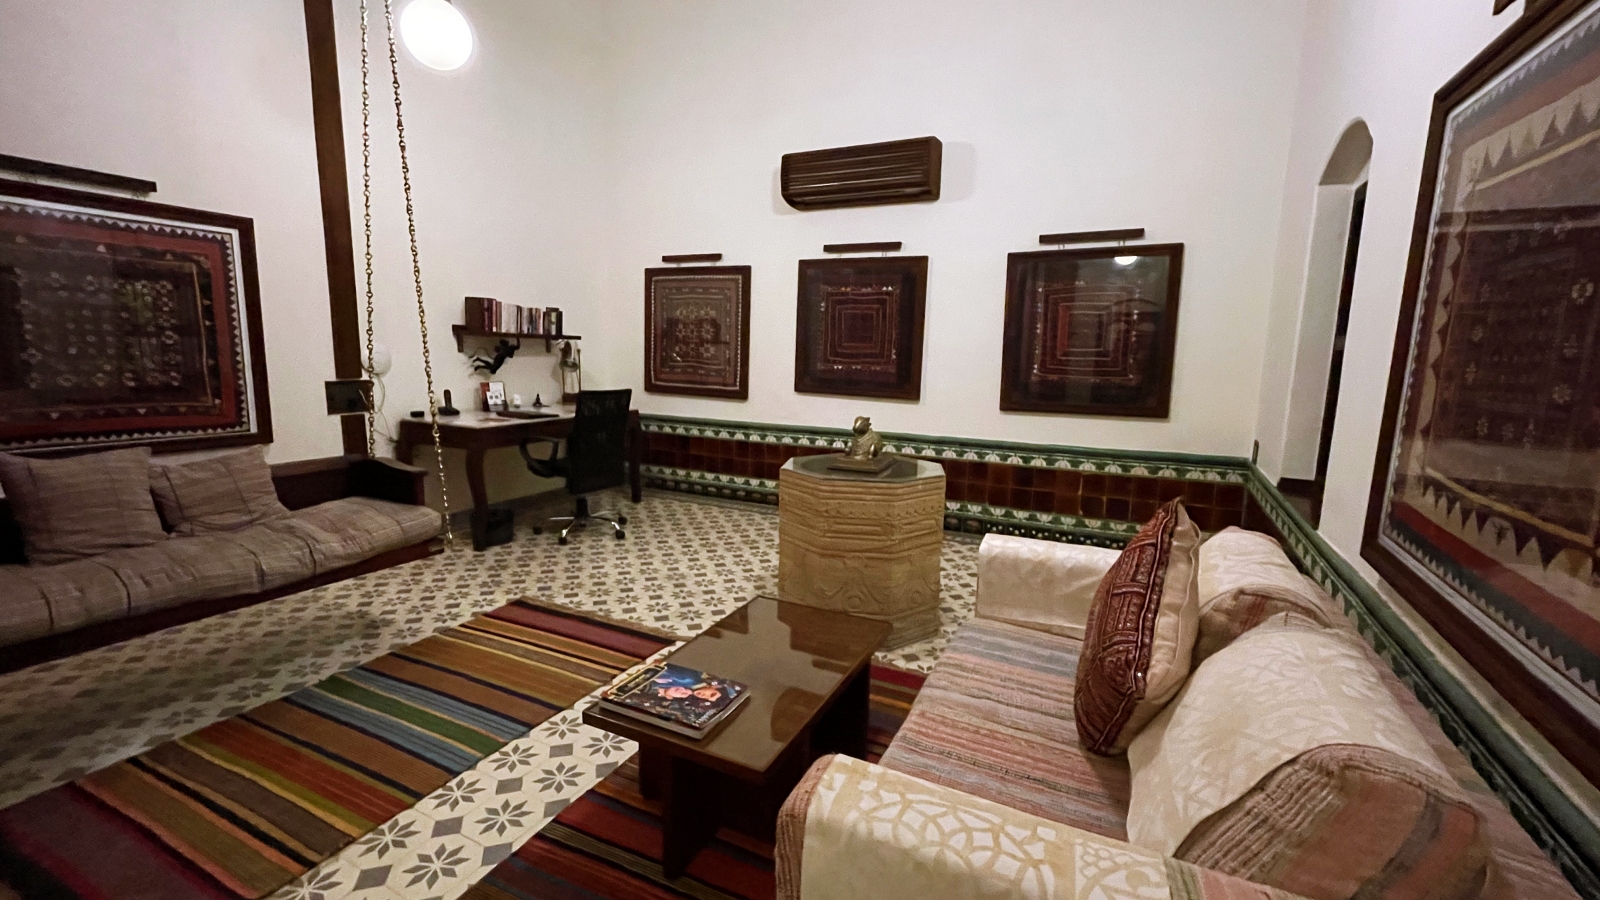 The House of MG: Heritage of Ahmedabad